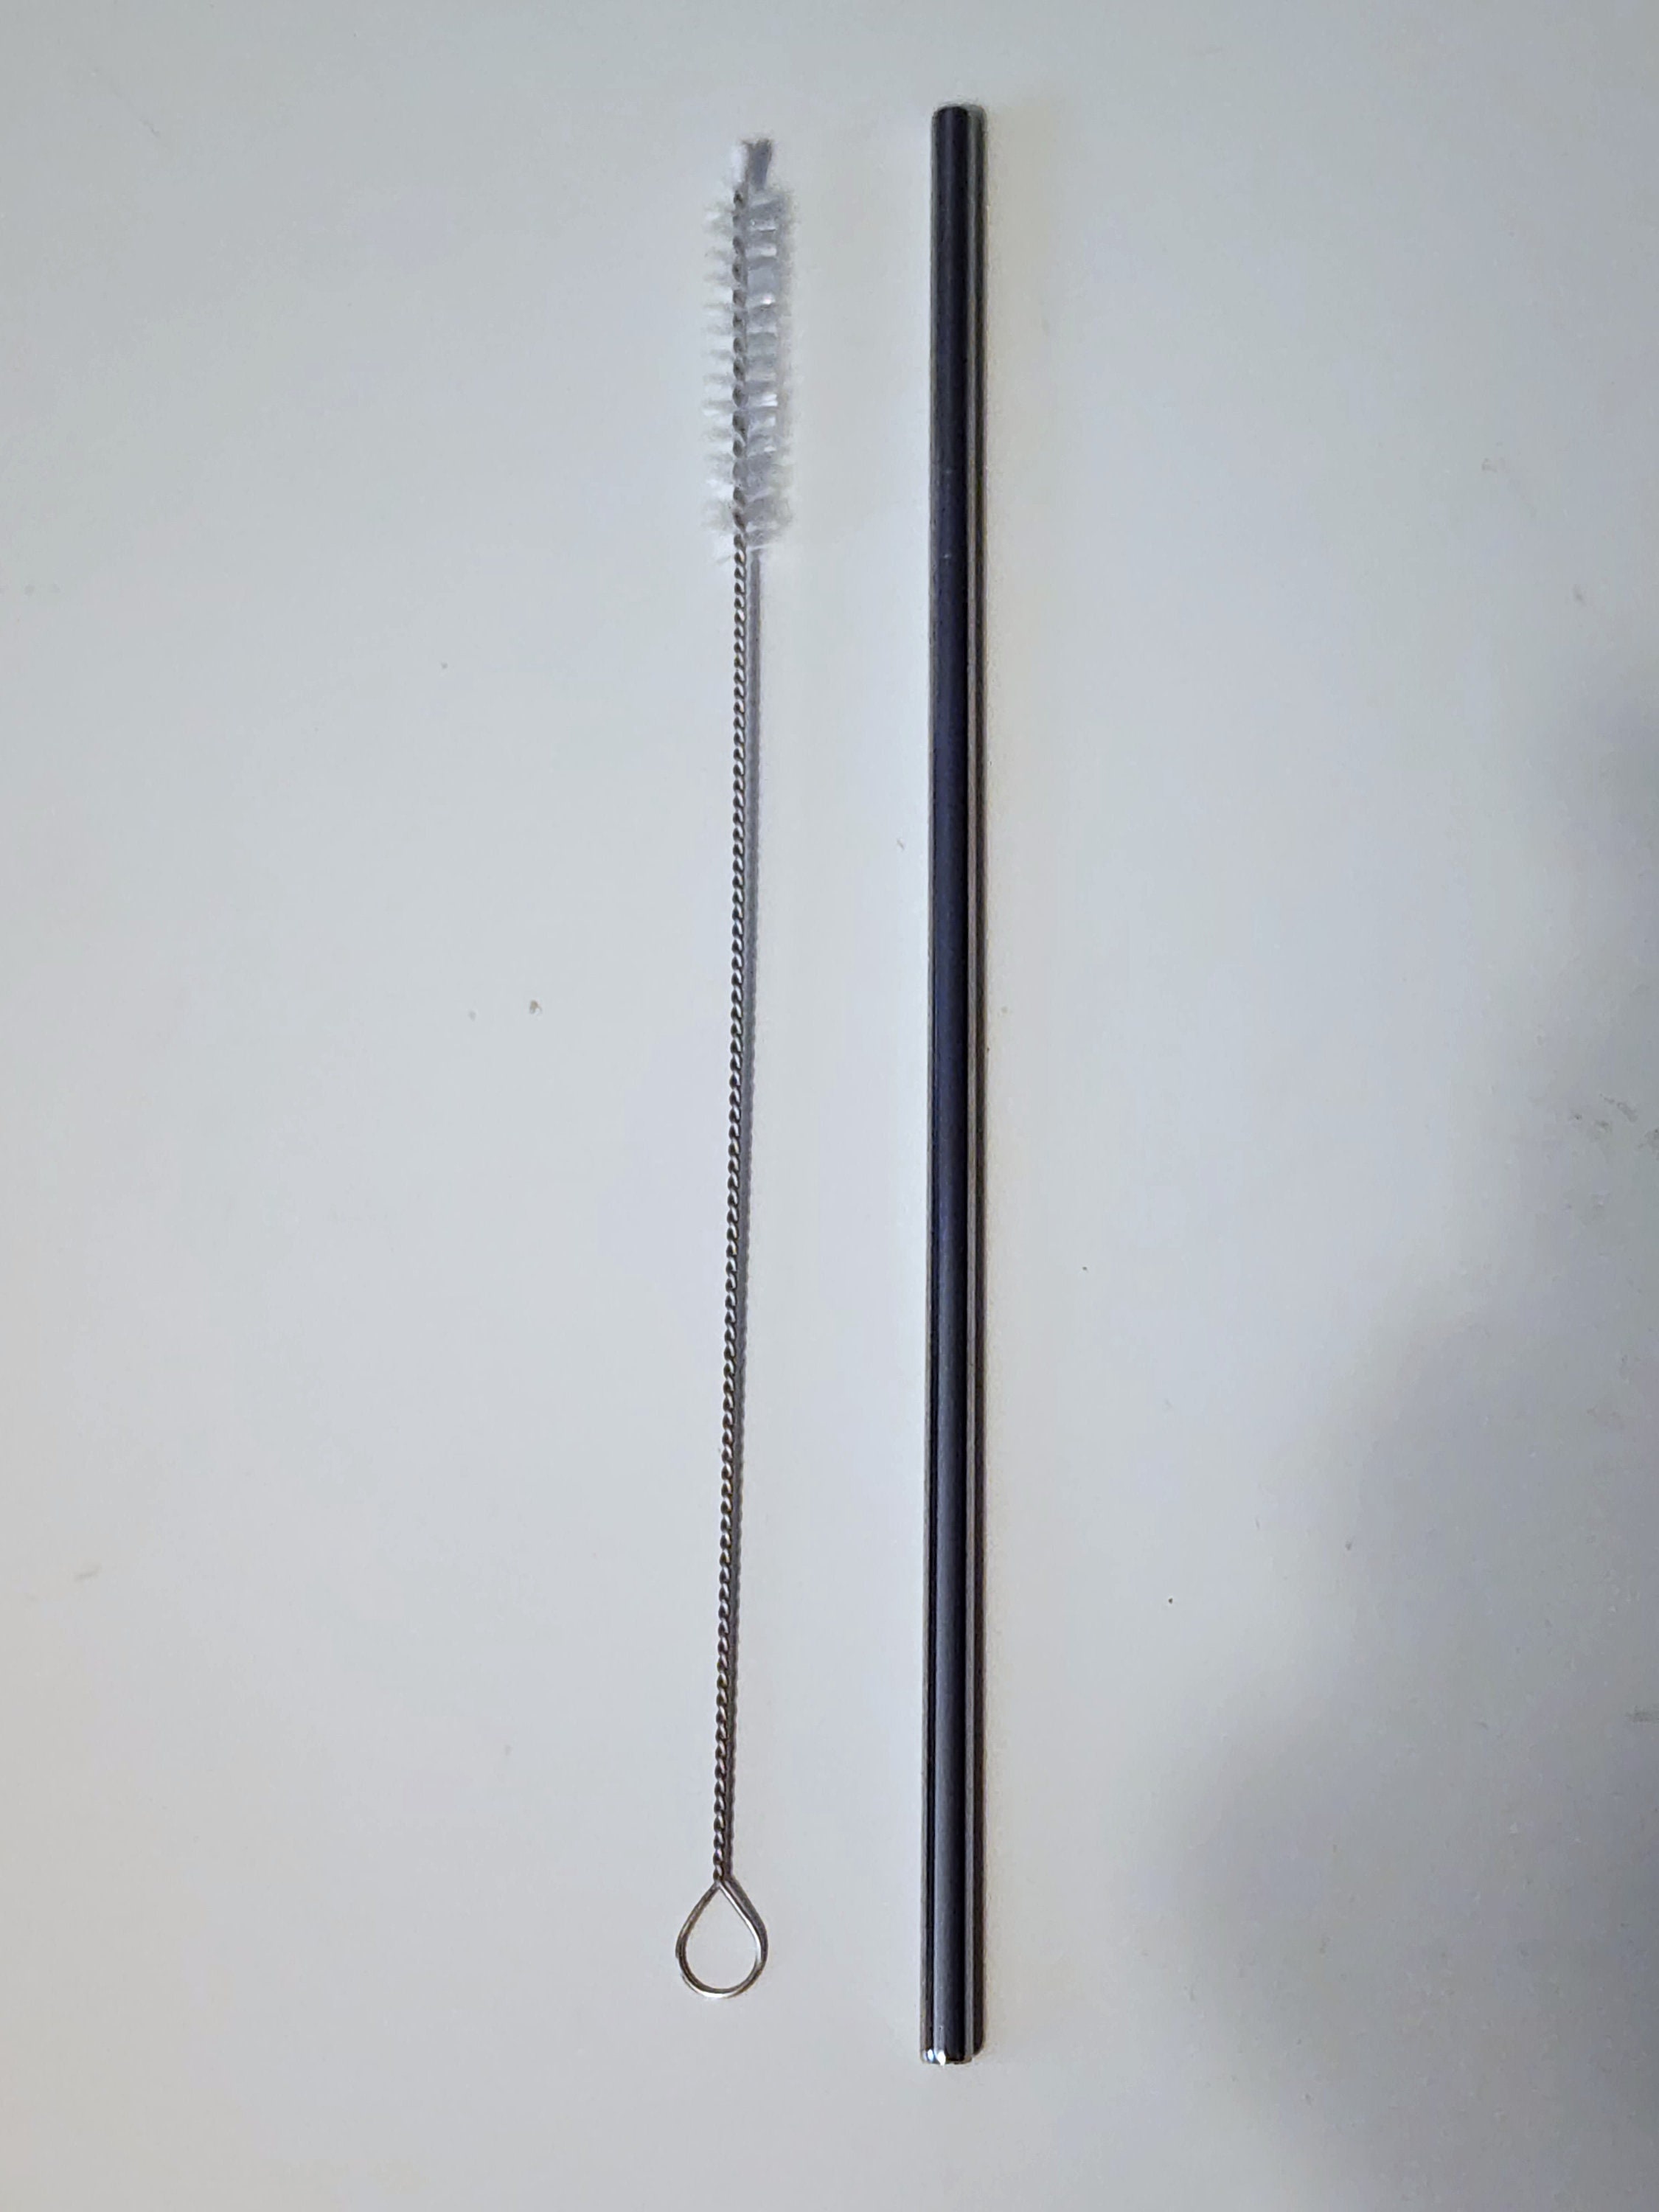 Photobioreactor Upgrade: 2-Liter metal straw with air stone and cleaning  brush